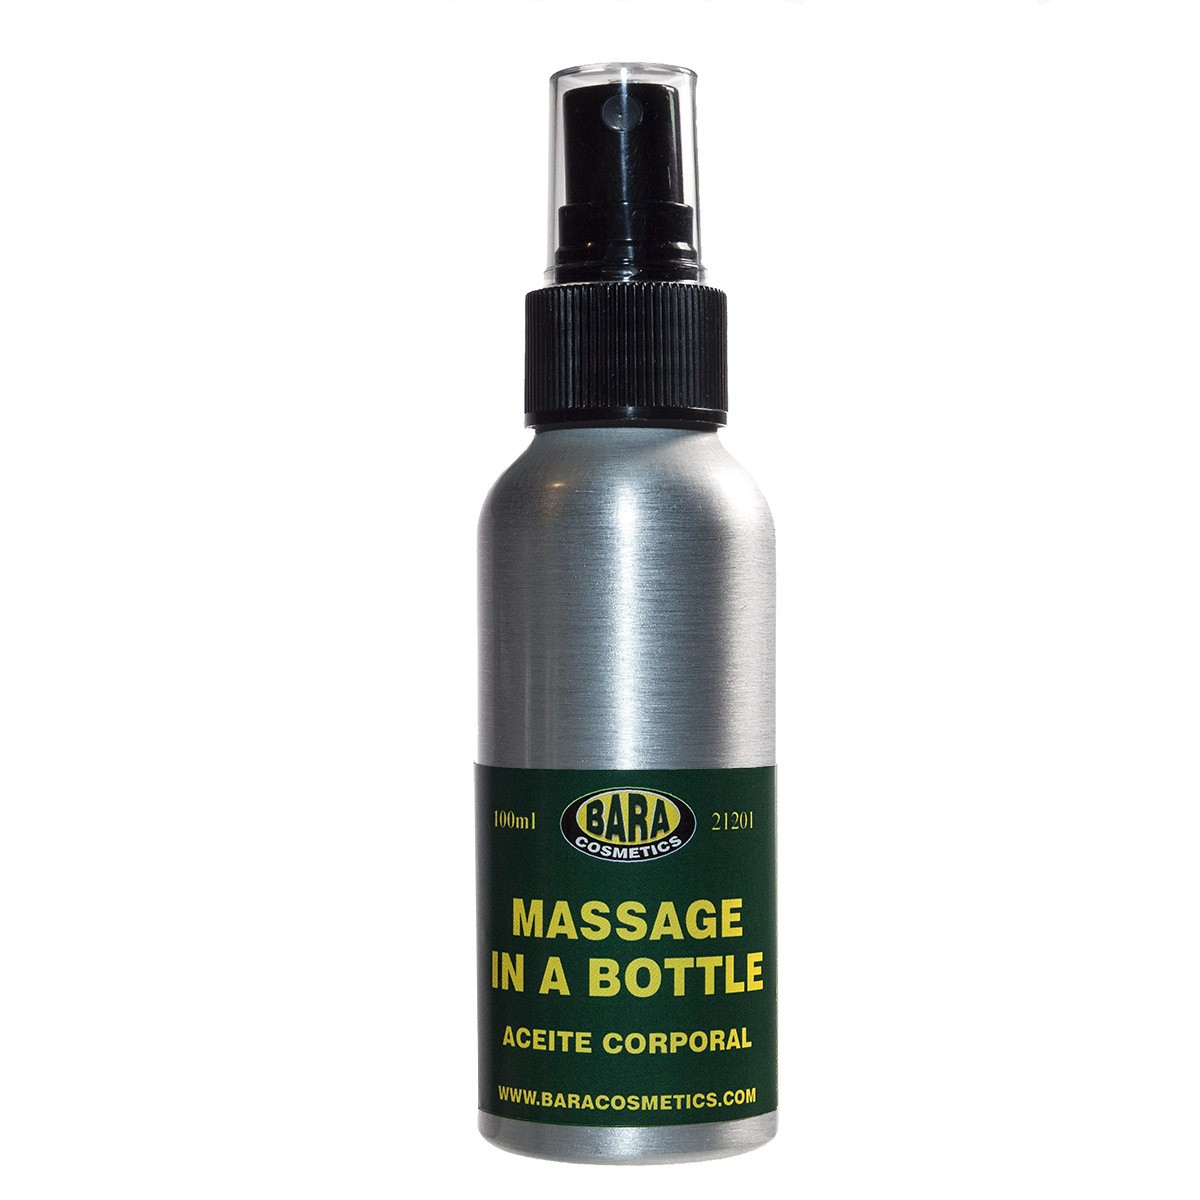 Aceite corporal Massage in a bottle